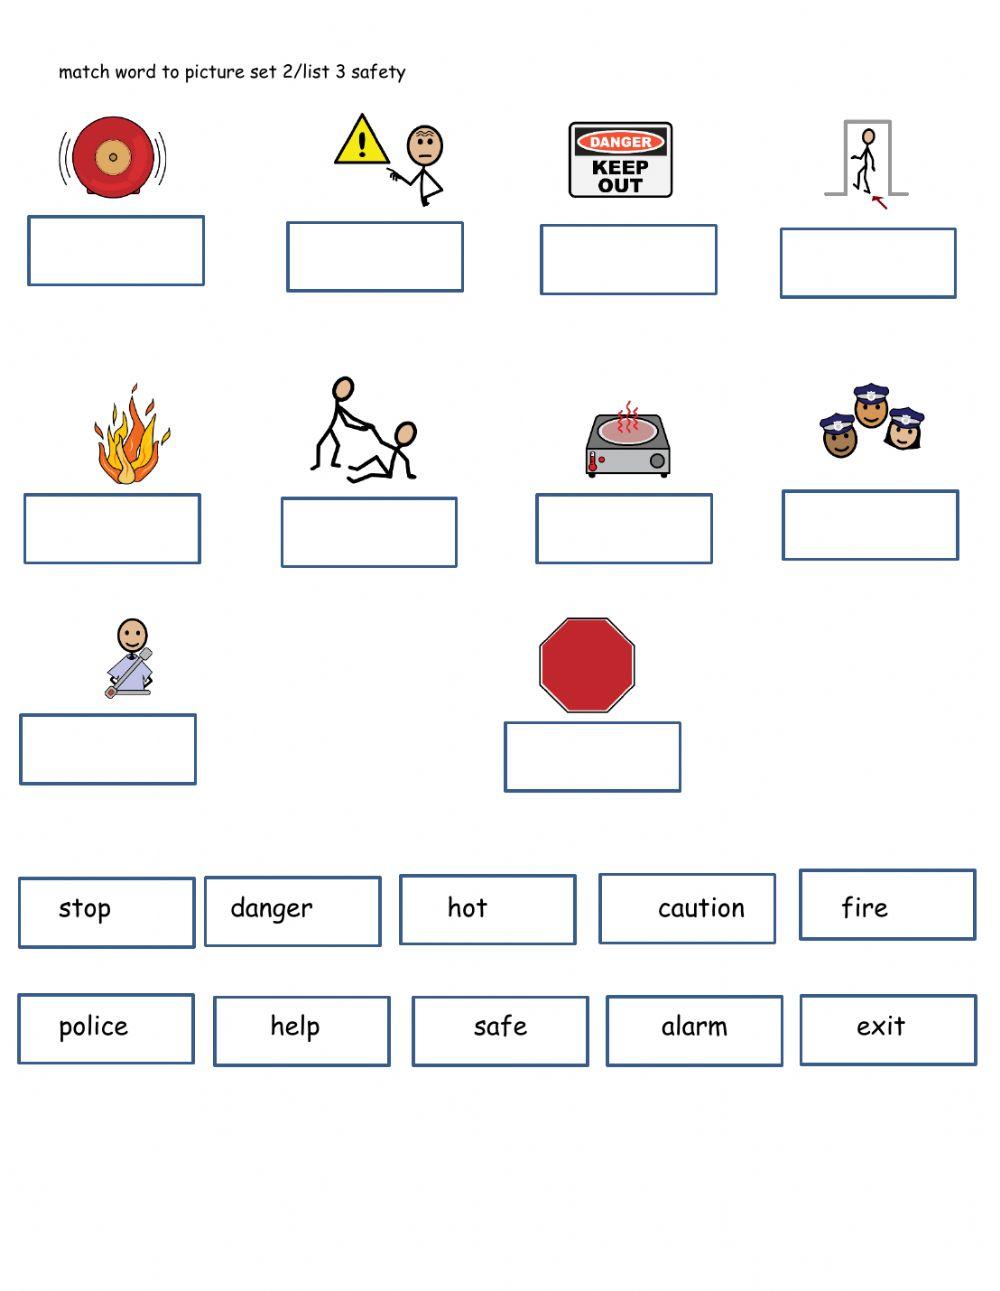 Safety word recognition